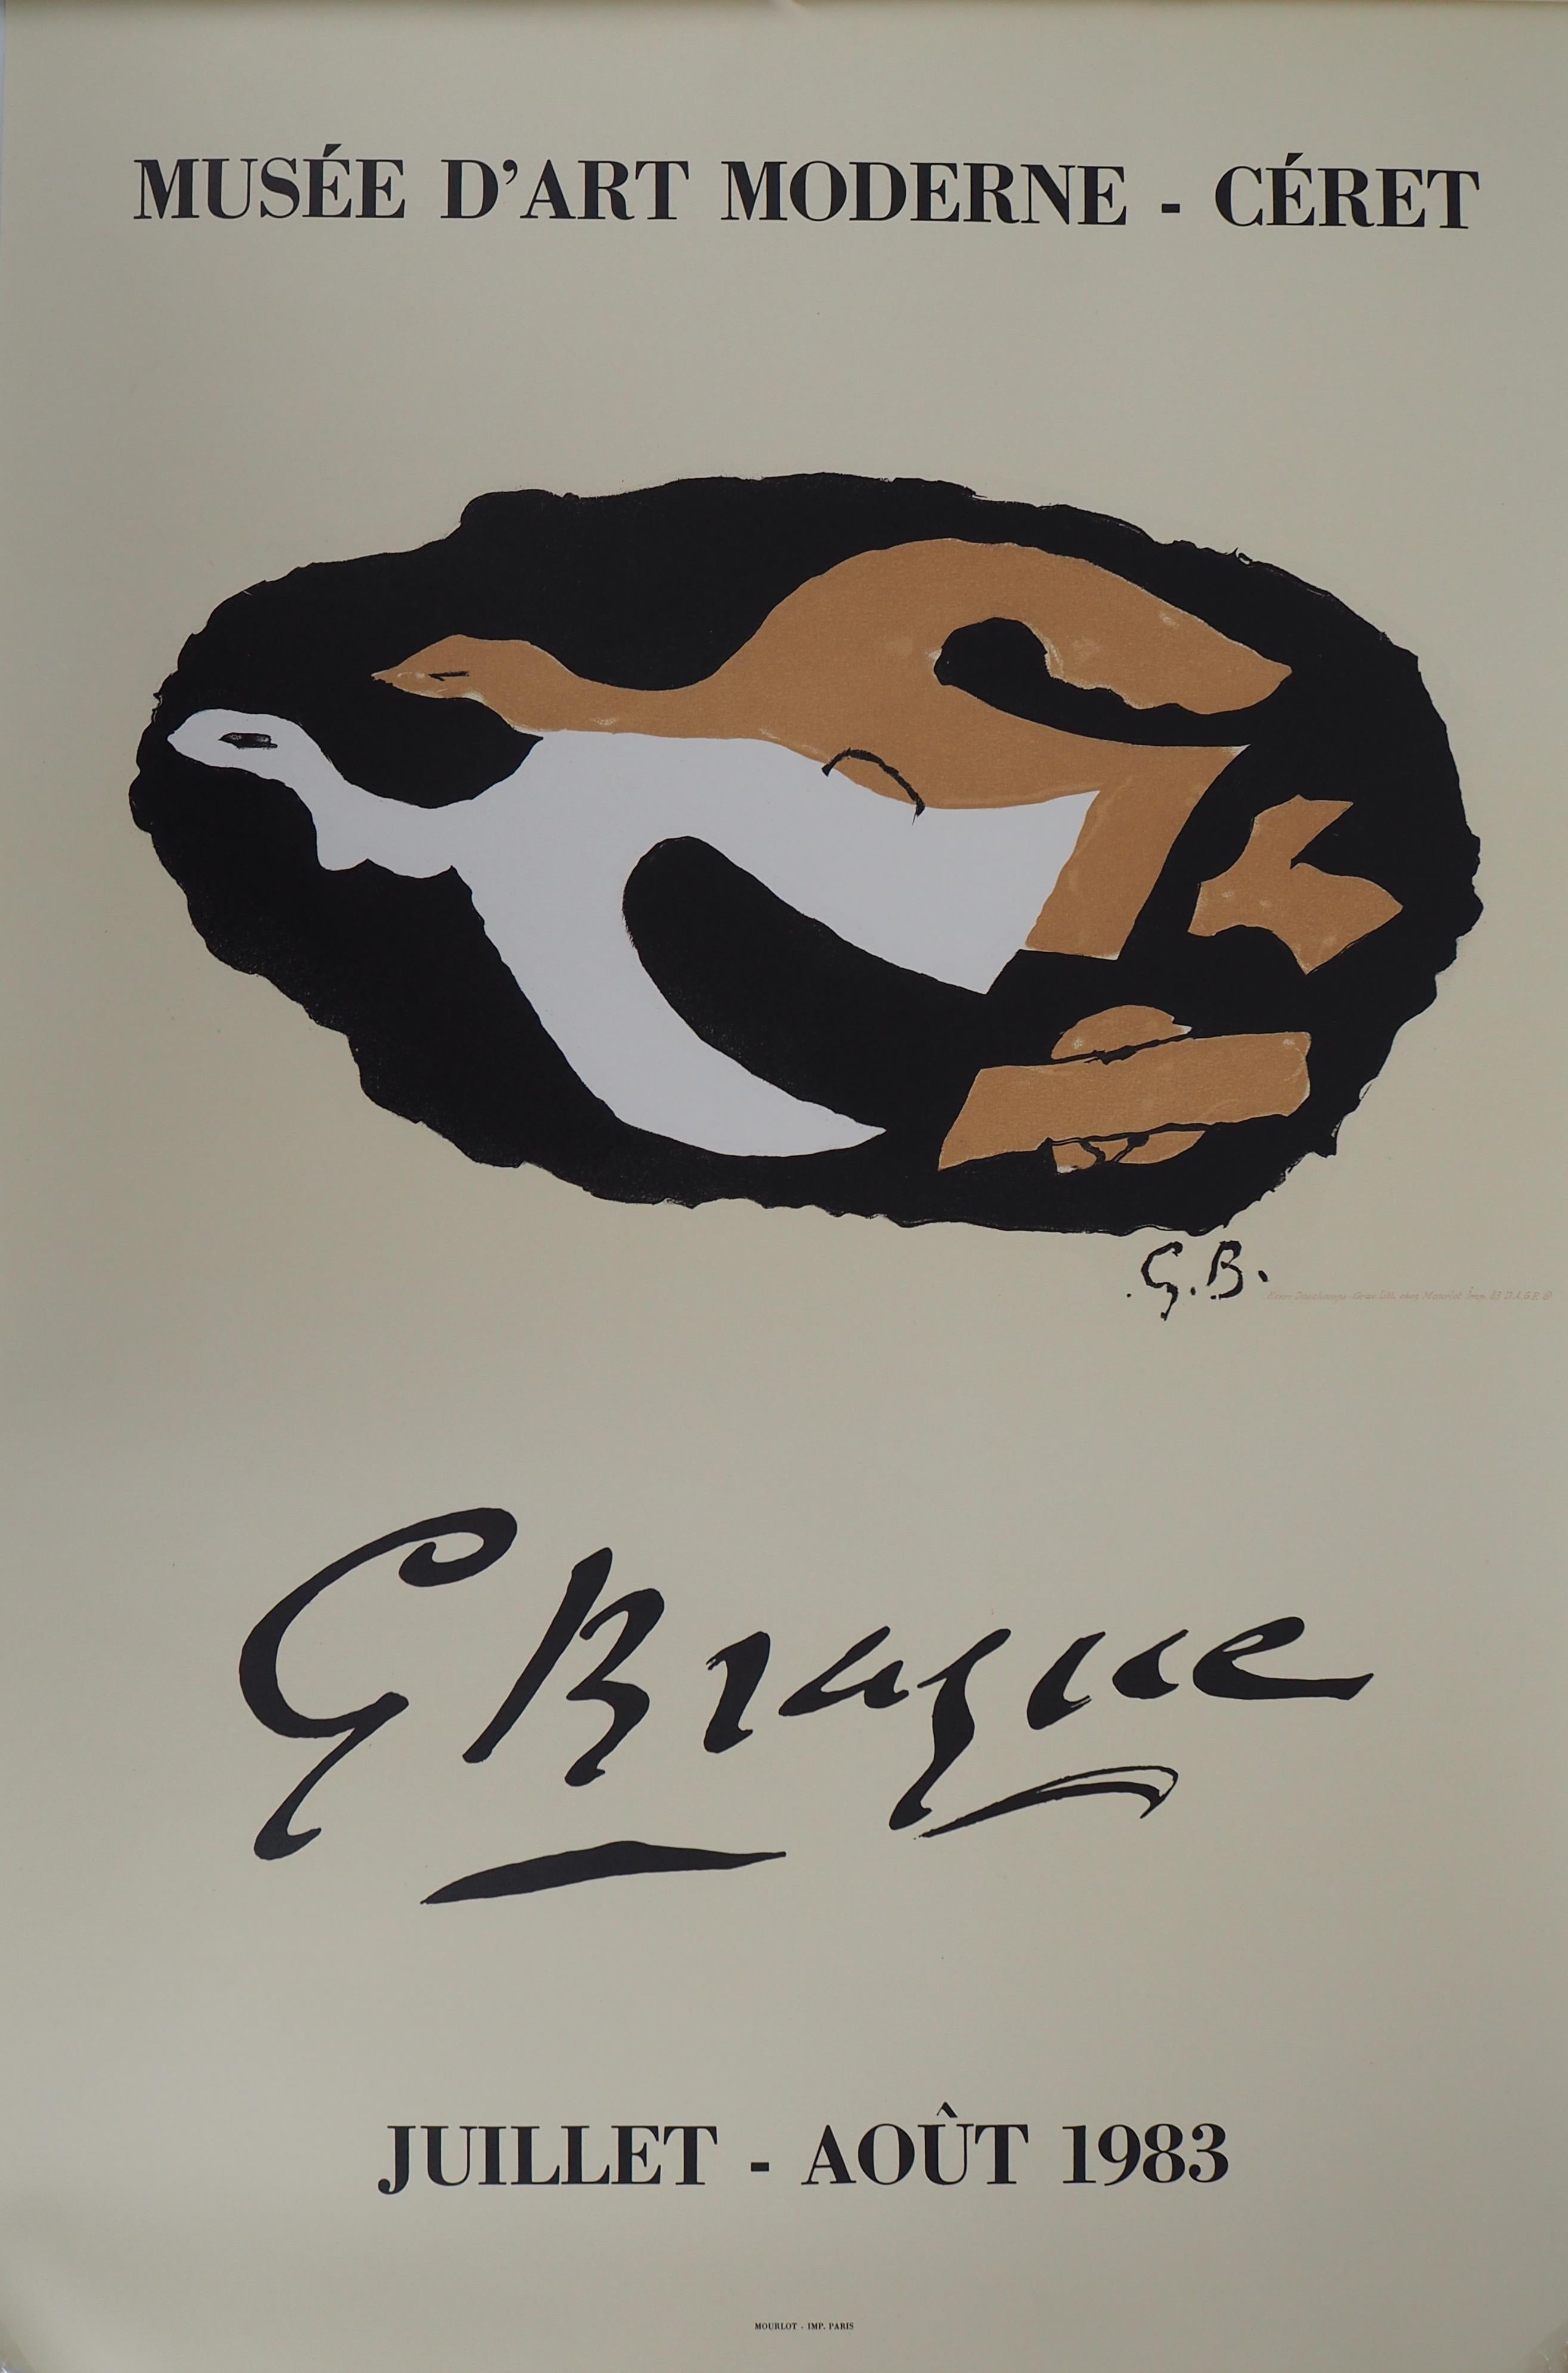 (after) Georges Braque Figurative Print - Two Birds Flying - Vintage lithograph exhibition poster # Mourlot